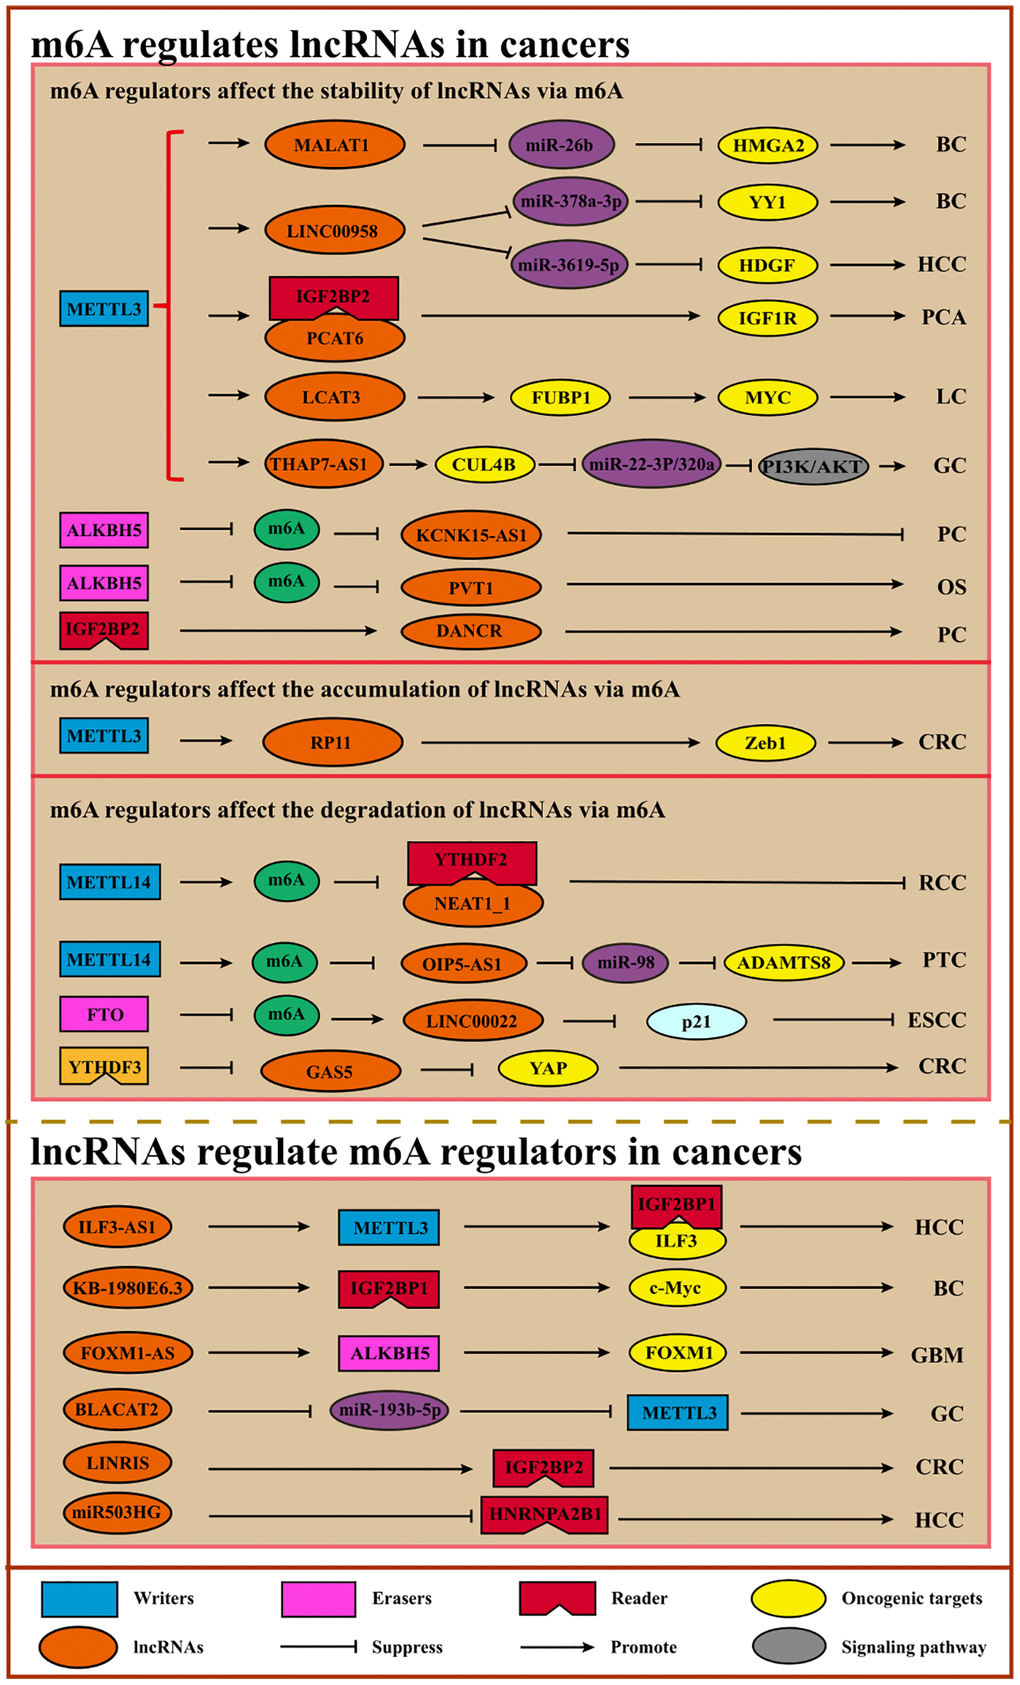 Interplays of m6A and lncRNAs. m6A can modulate the stability, degradation, or accumulation of lncRNAs to regulate cancer initiation, progression, and therapy. Conversely, lncRNAs can serve as ceRNAs to regulate m6A regulators via sponging miRNAs or interact directly with m6A regulators to facilitate or inhibit cancer. Abbreviations: BC: breast cancer; HCC: hepatocellular carcinoma; PCA: prostate cancer; LC: lung cancer; GC: gastric cancer; PC: pancreatic cancer; OS: osteosarcoma; CRC: colorectal cancer; RCC: renal cell carcinoma; PTC: papillary thyroid cancer; ESCC: esophageal squamous cell carcinoma; GBM: glioblastoma.